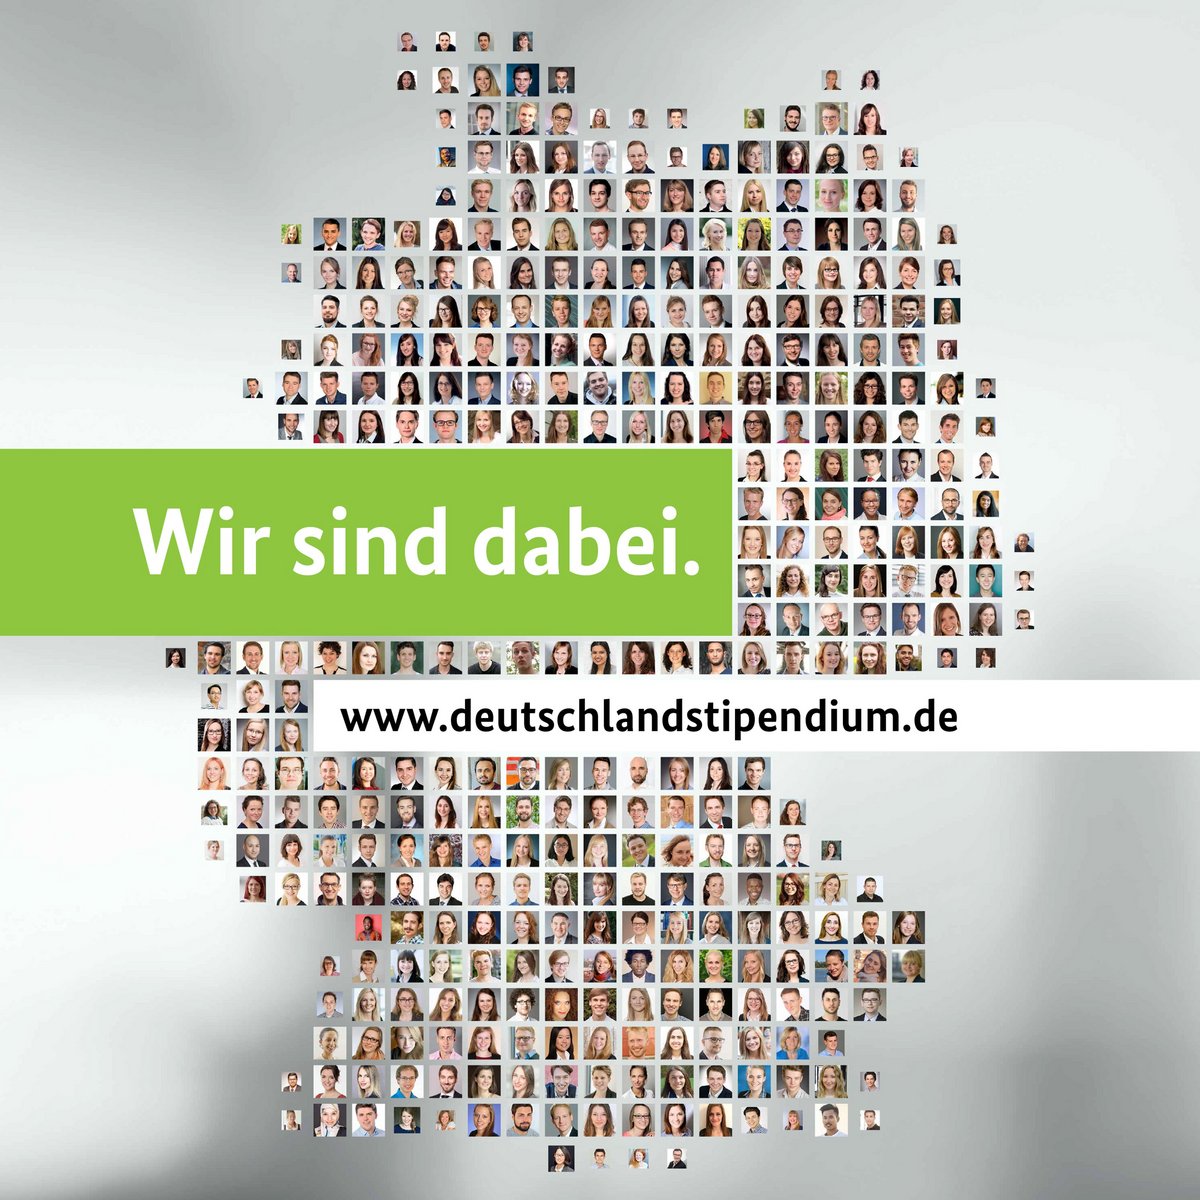 Poster consisting of people forming the outline of the Federal Republic of Germany with the text "We are part of the Deutschlandstipendium" in the centre.